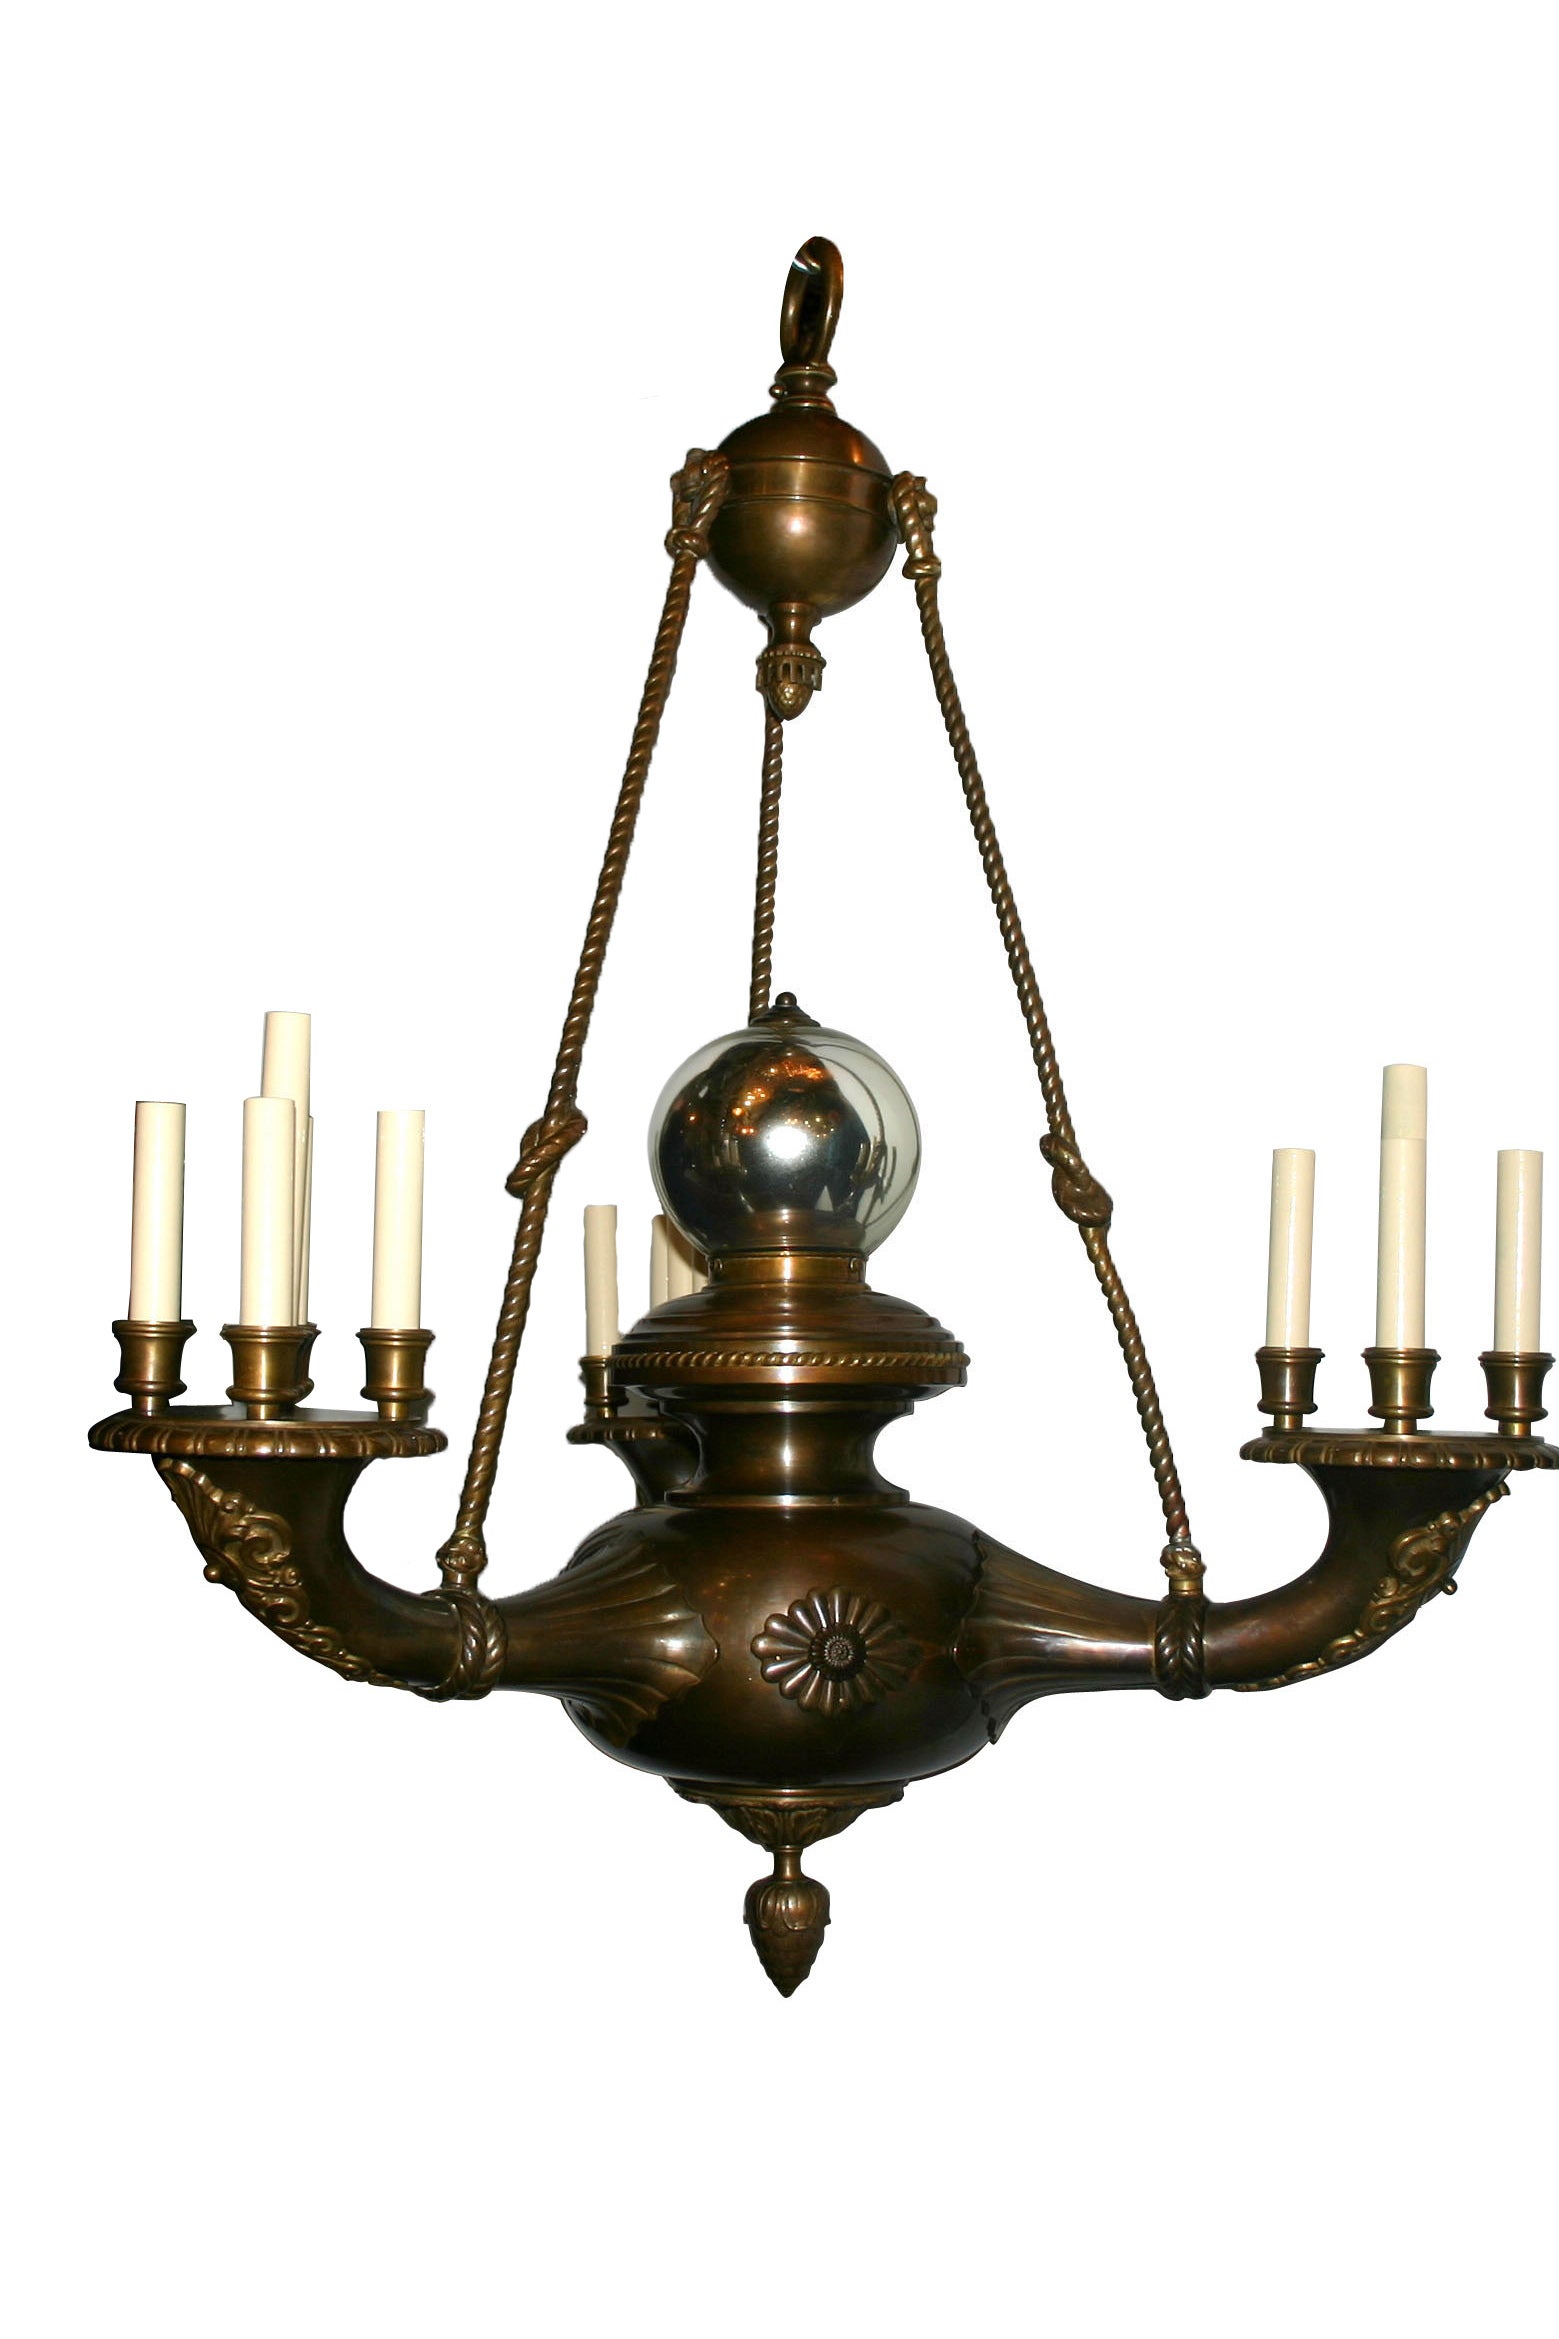 Large Neoclassic Chandelier